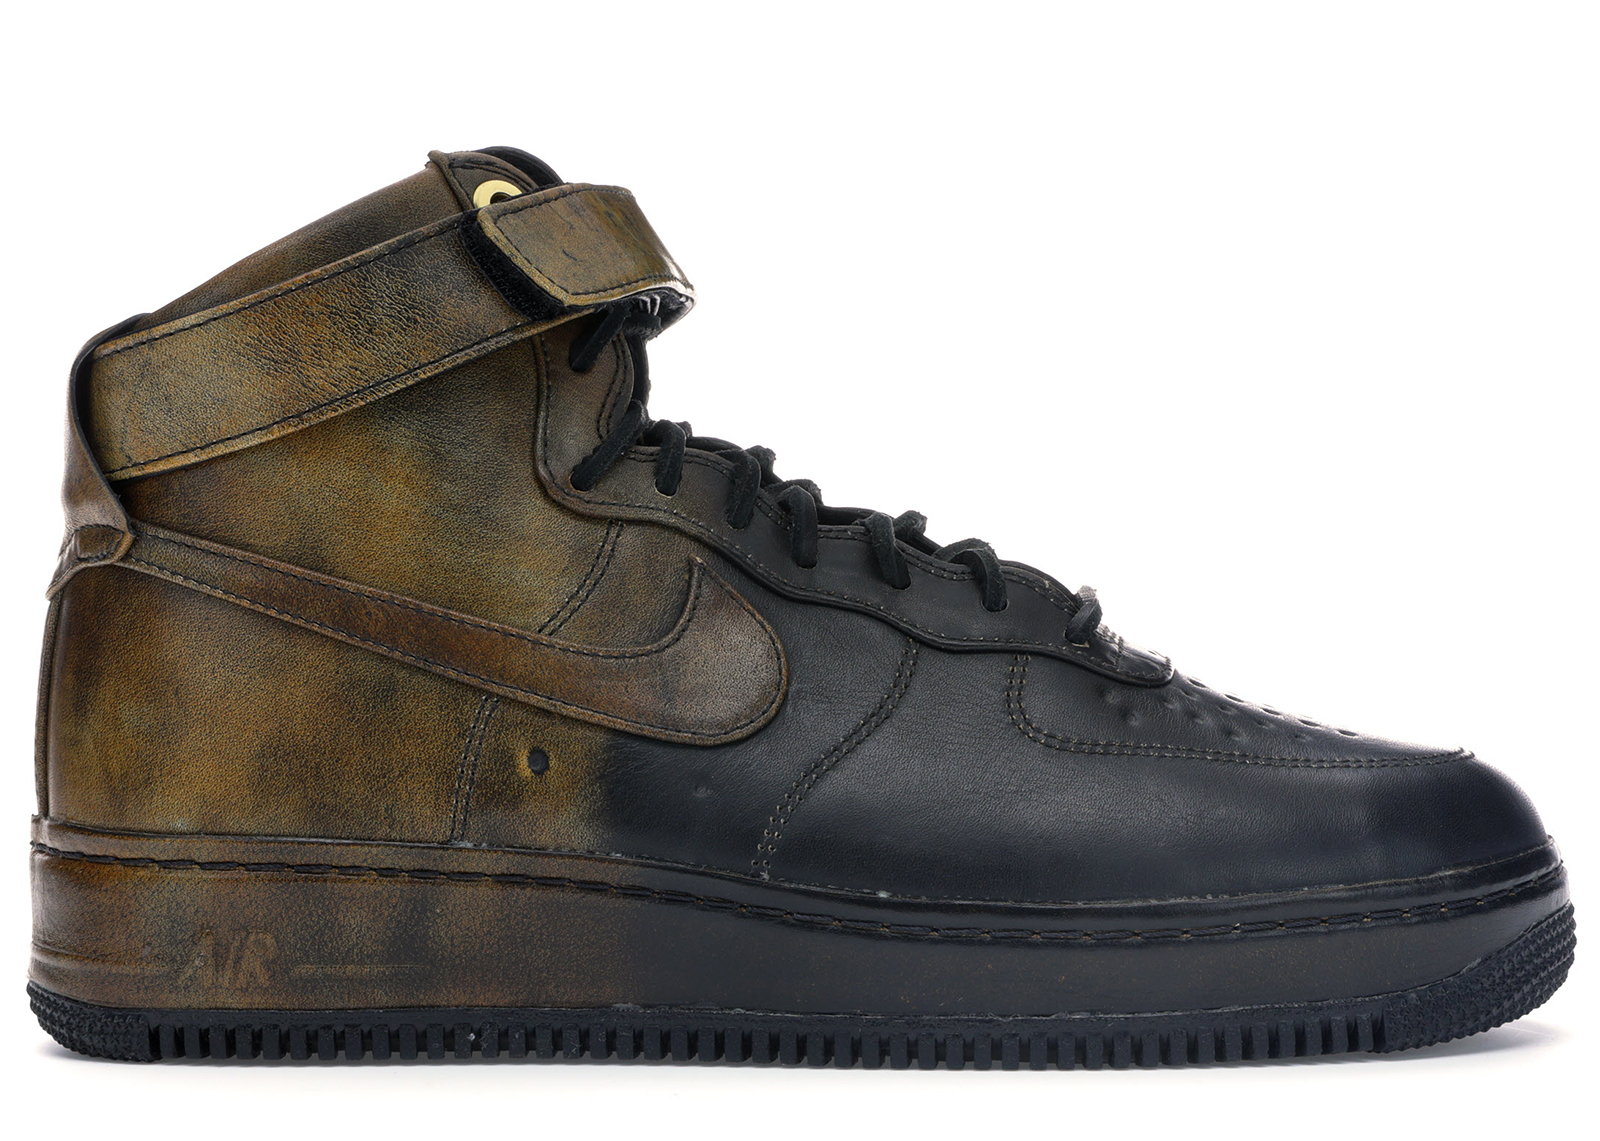 Nike Air Force 1 High Pigalle Black Gold - 677129-090